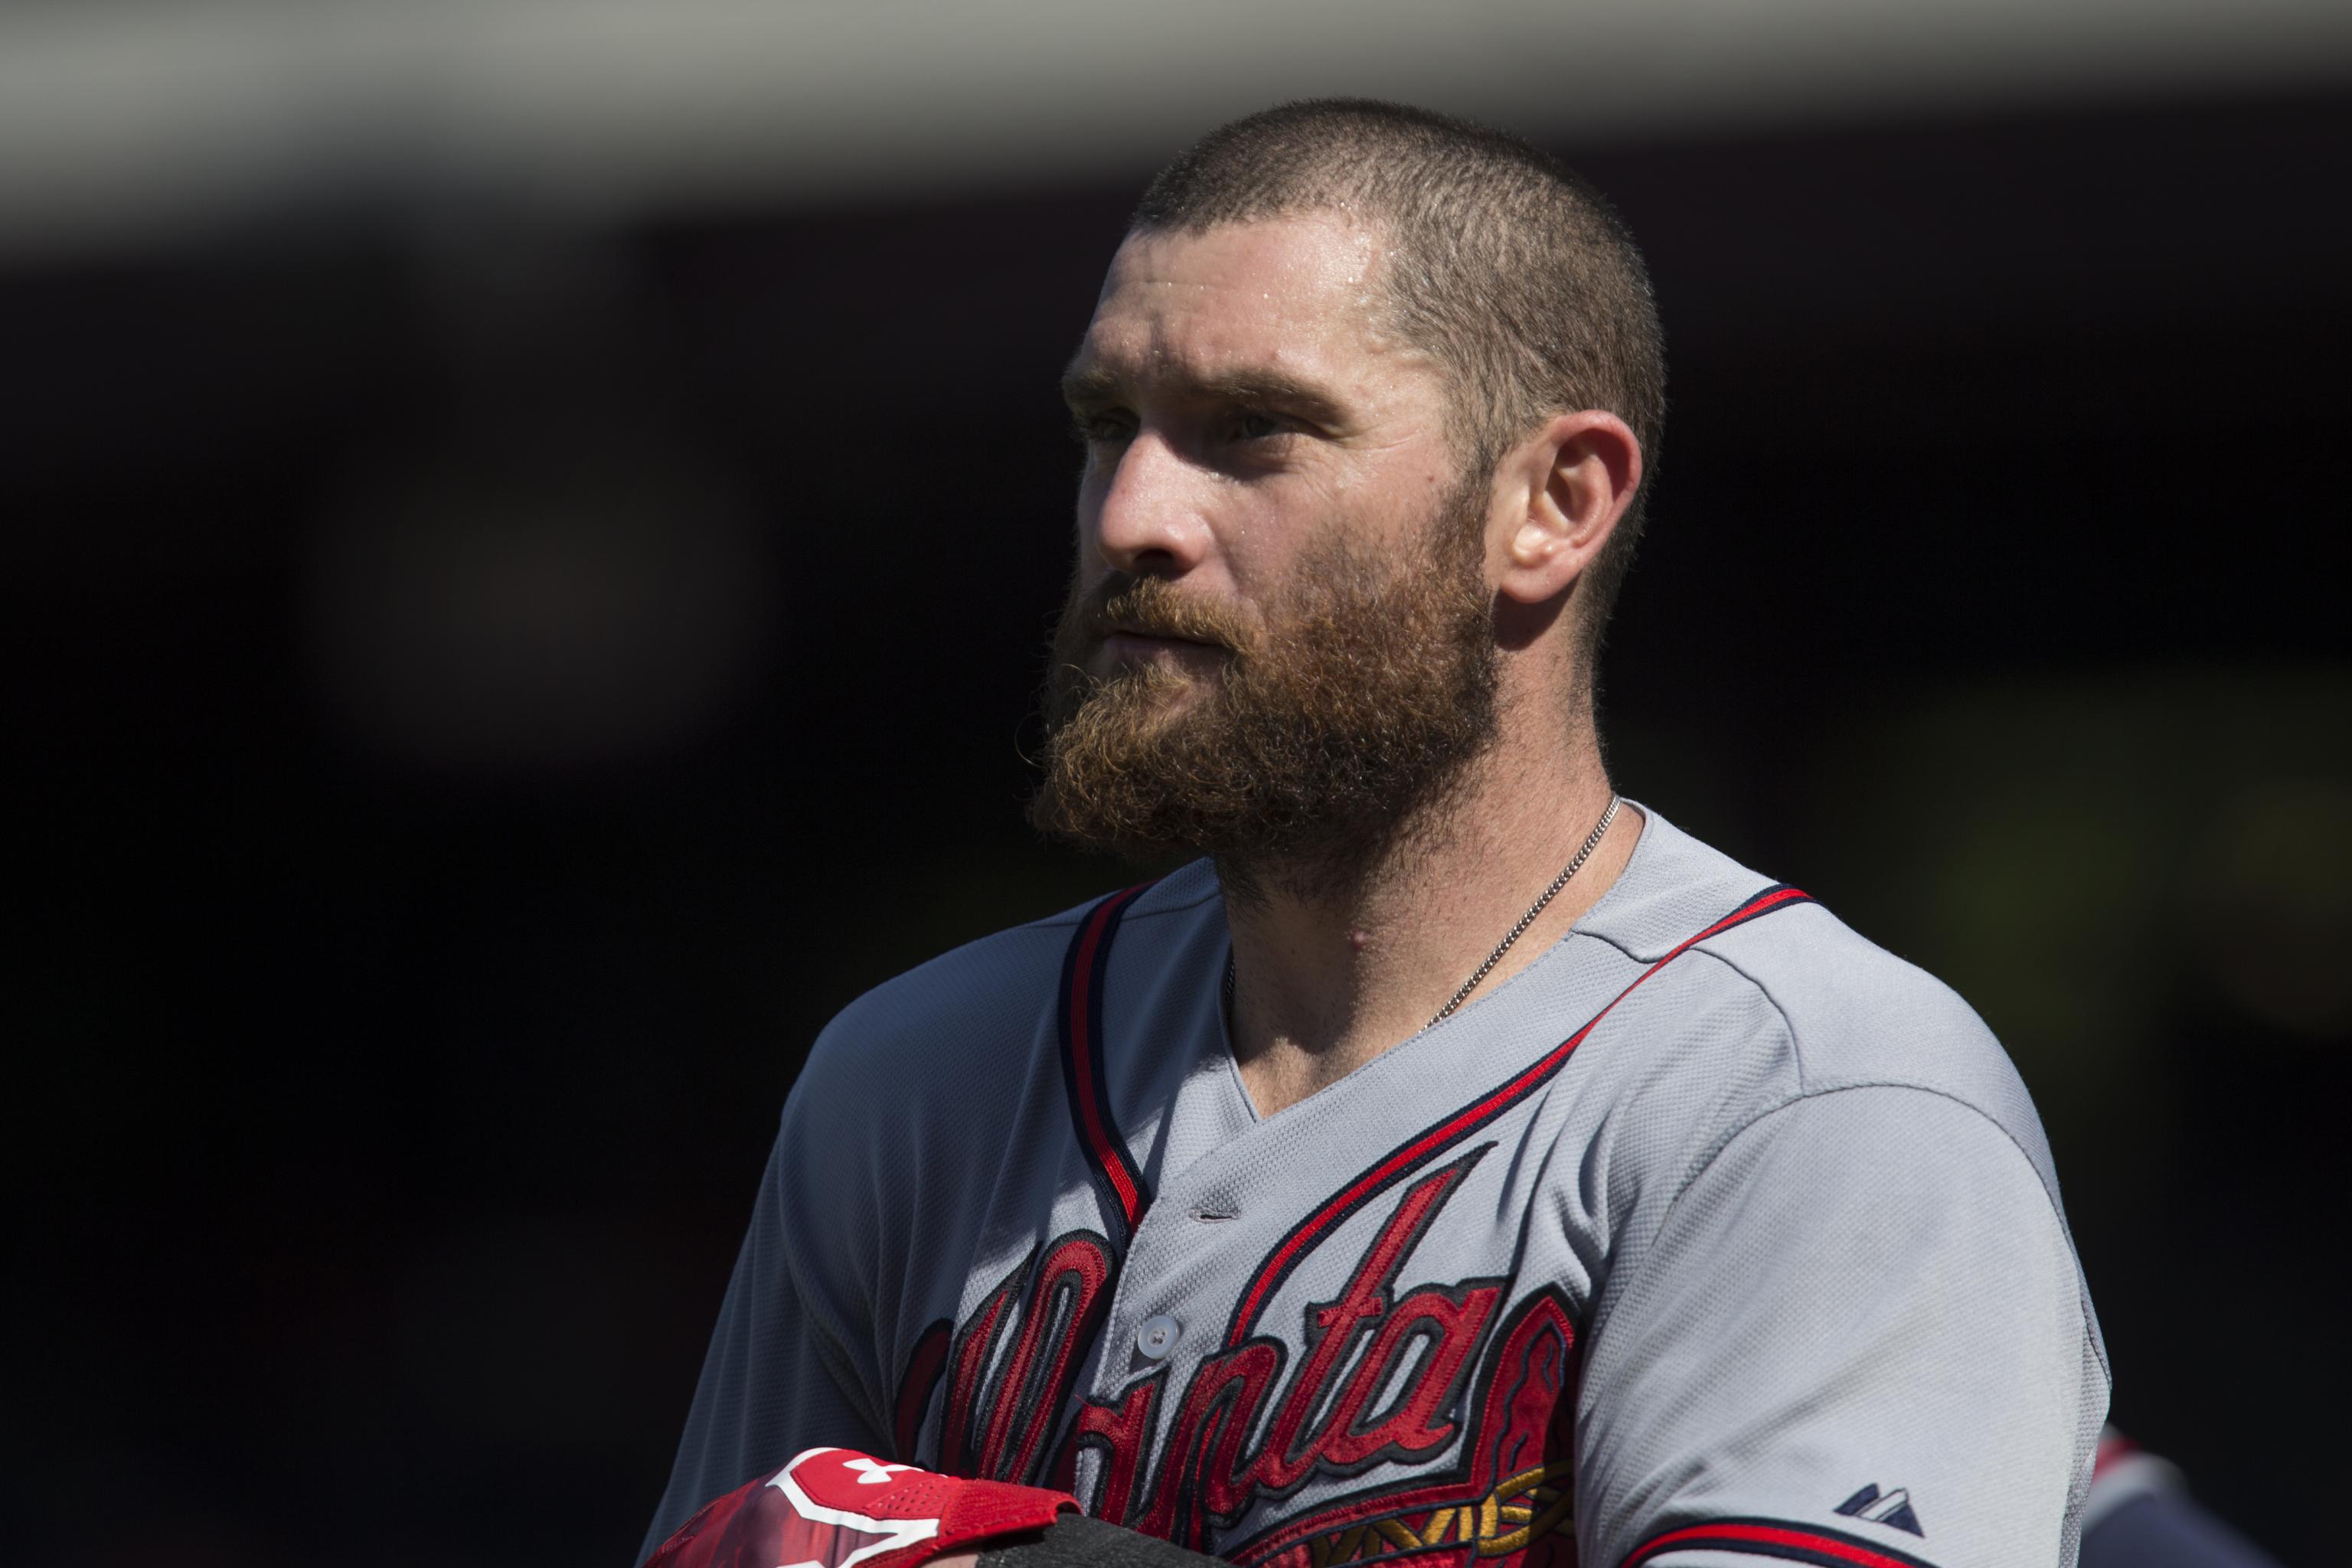 Jonny Gomes headed to Royals in trade from Braves